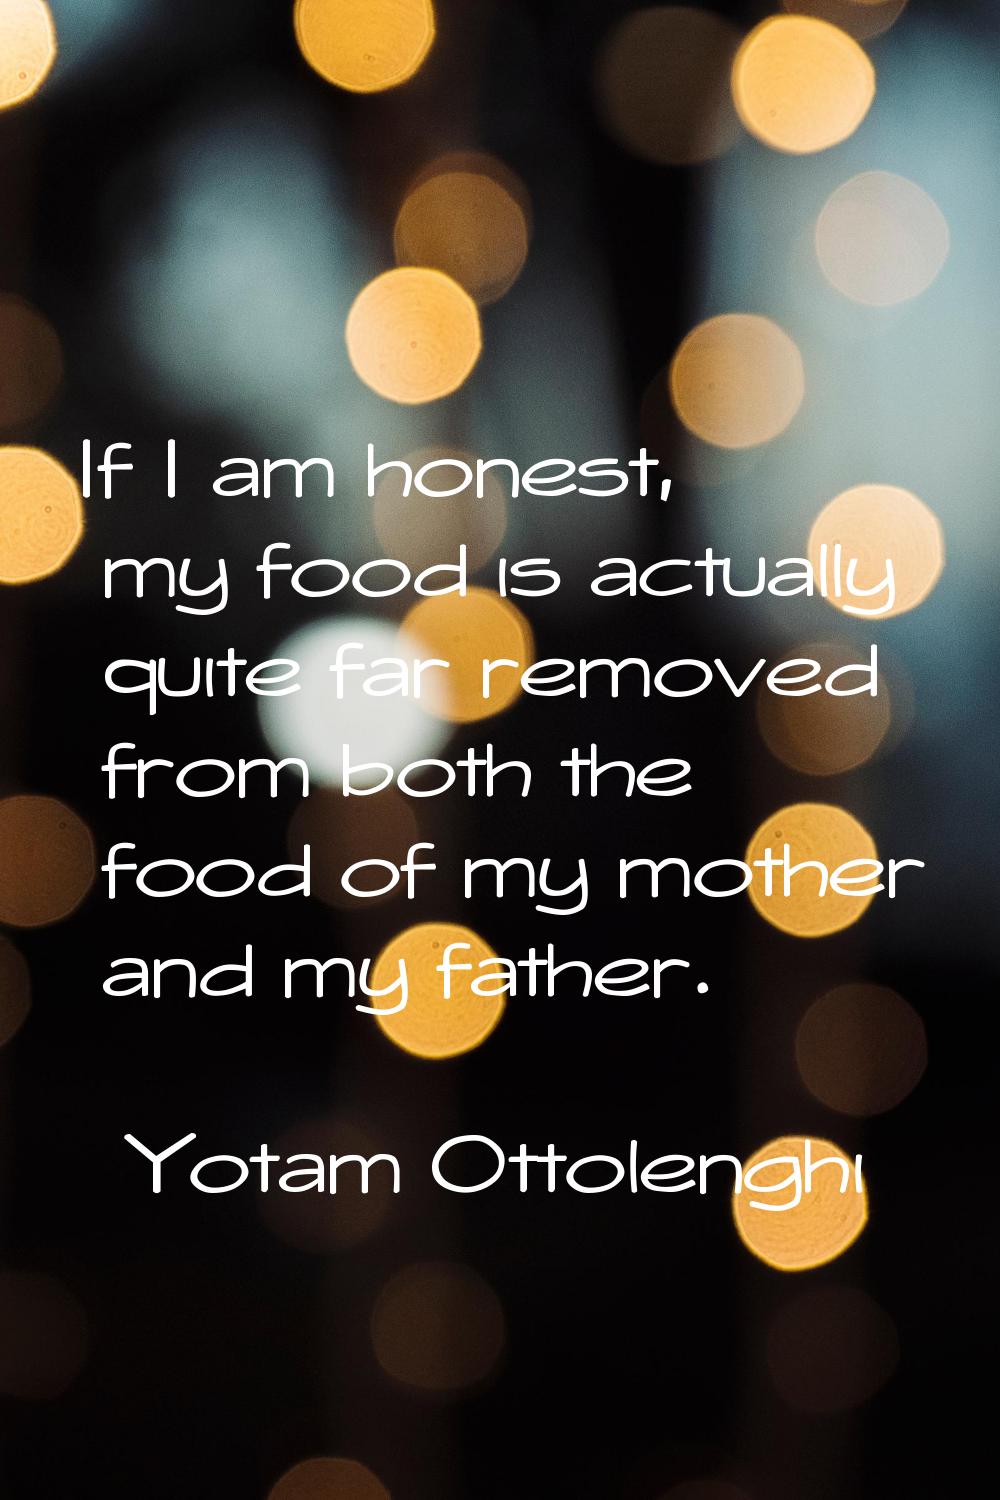 If I am honest, my food is actually quite far removed from both the food of my mother and my father